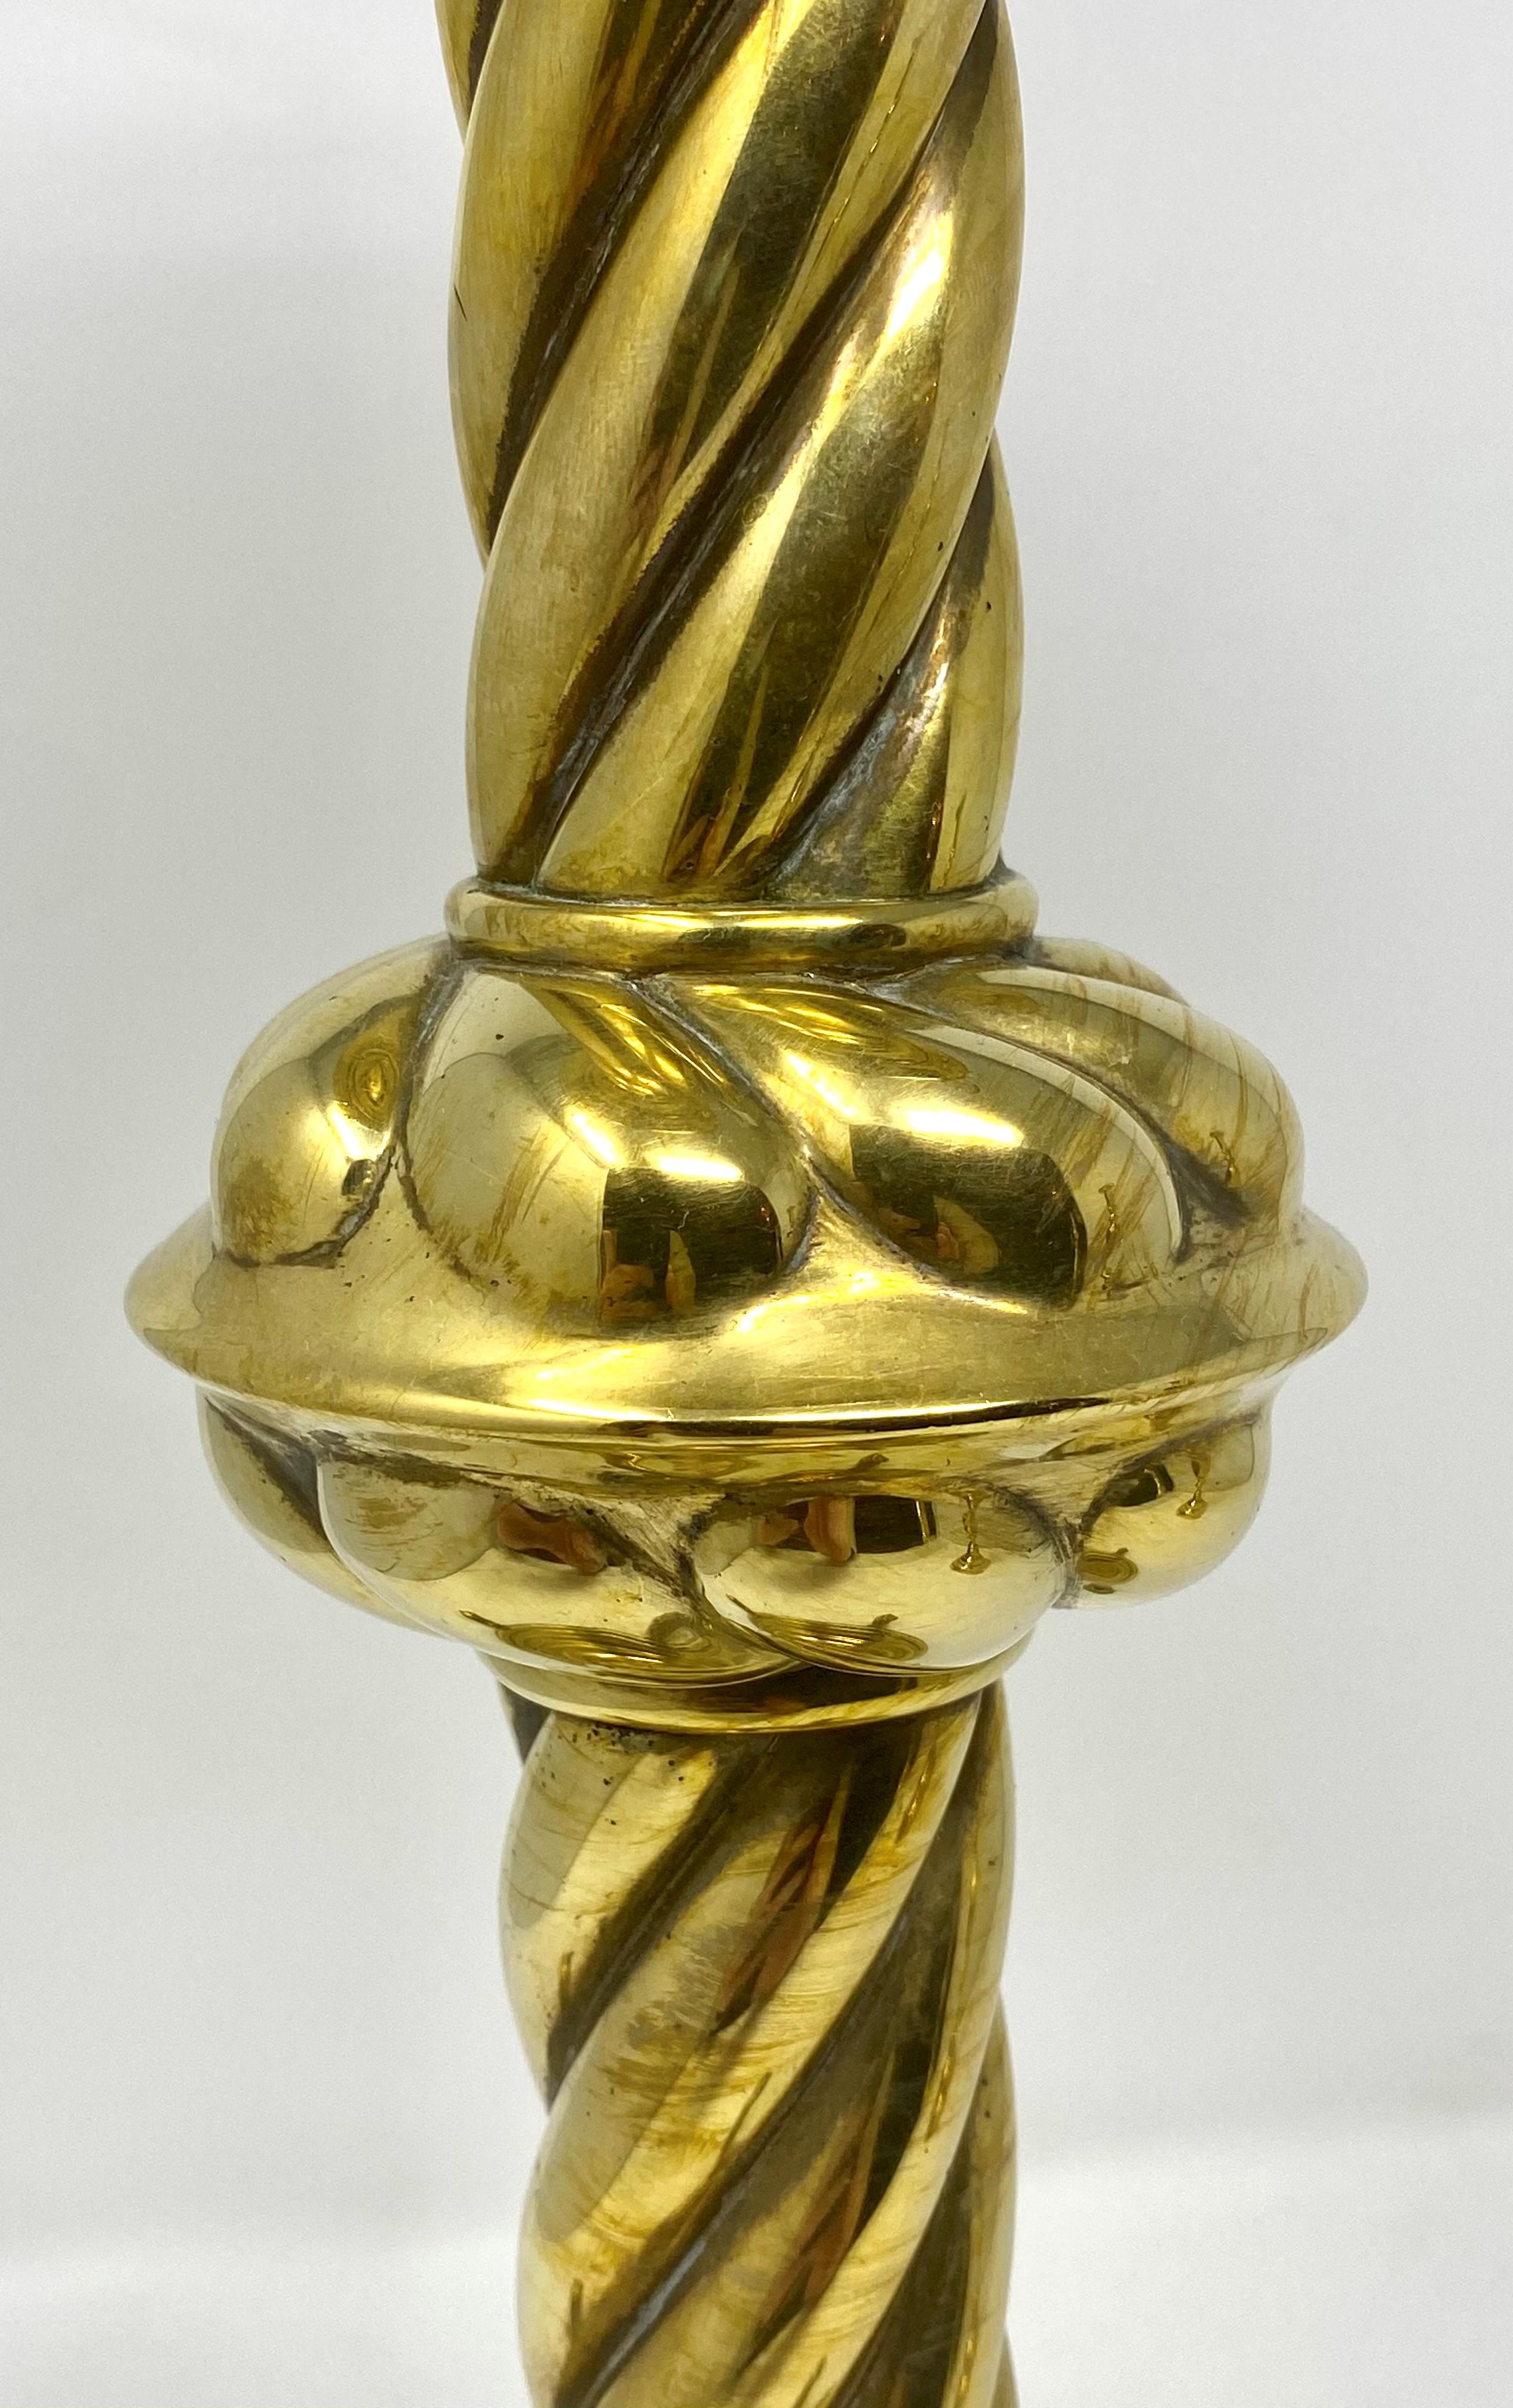 Antique English Victorian Brass Candlestick with Lions, circa 1880-1890 In Good Condition For Sale In New Orleans, LA